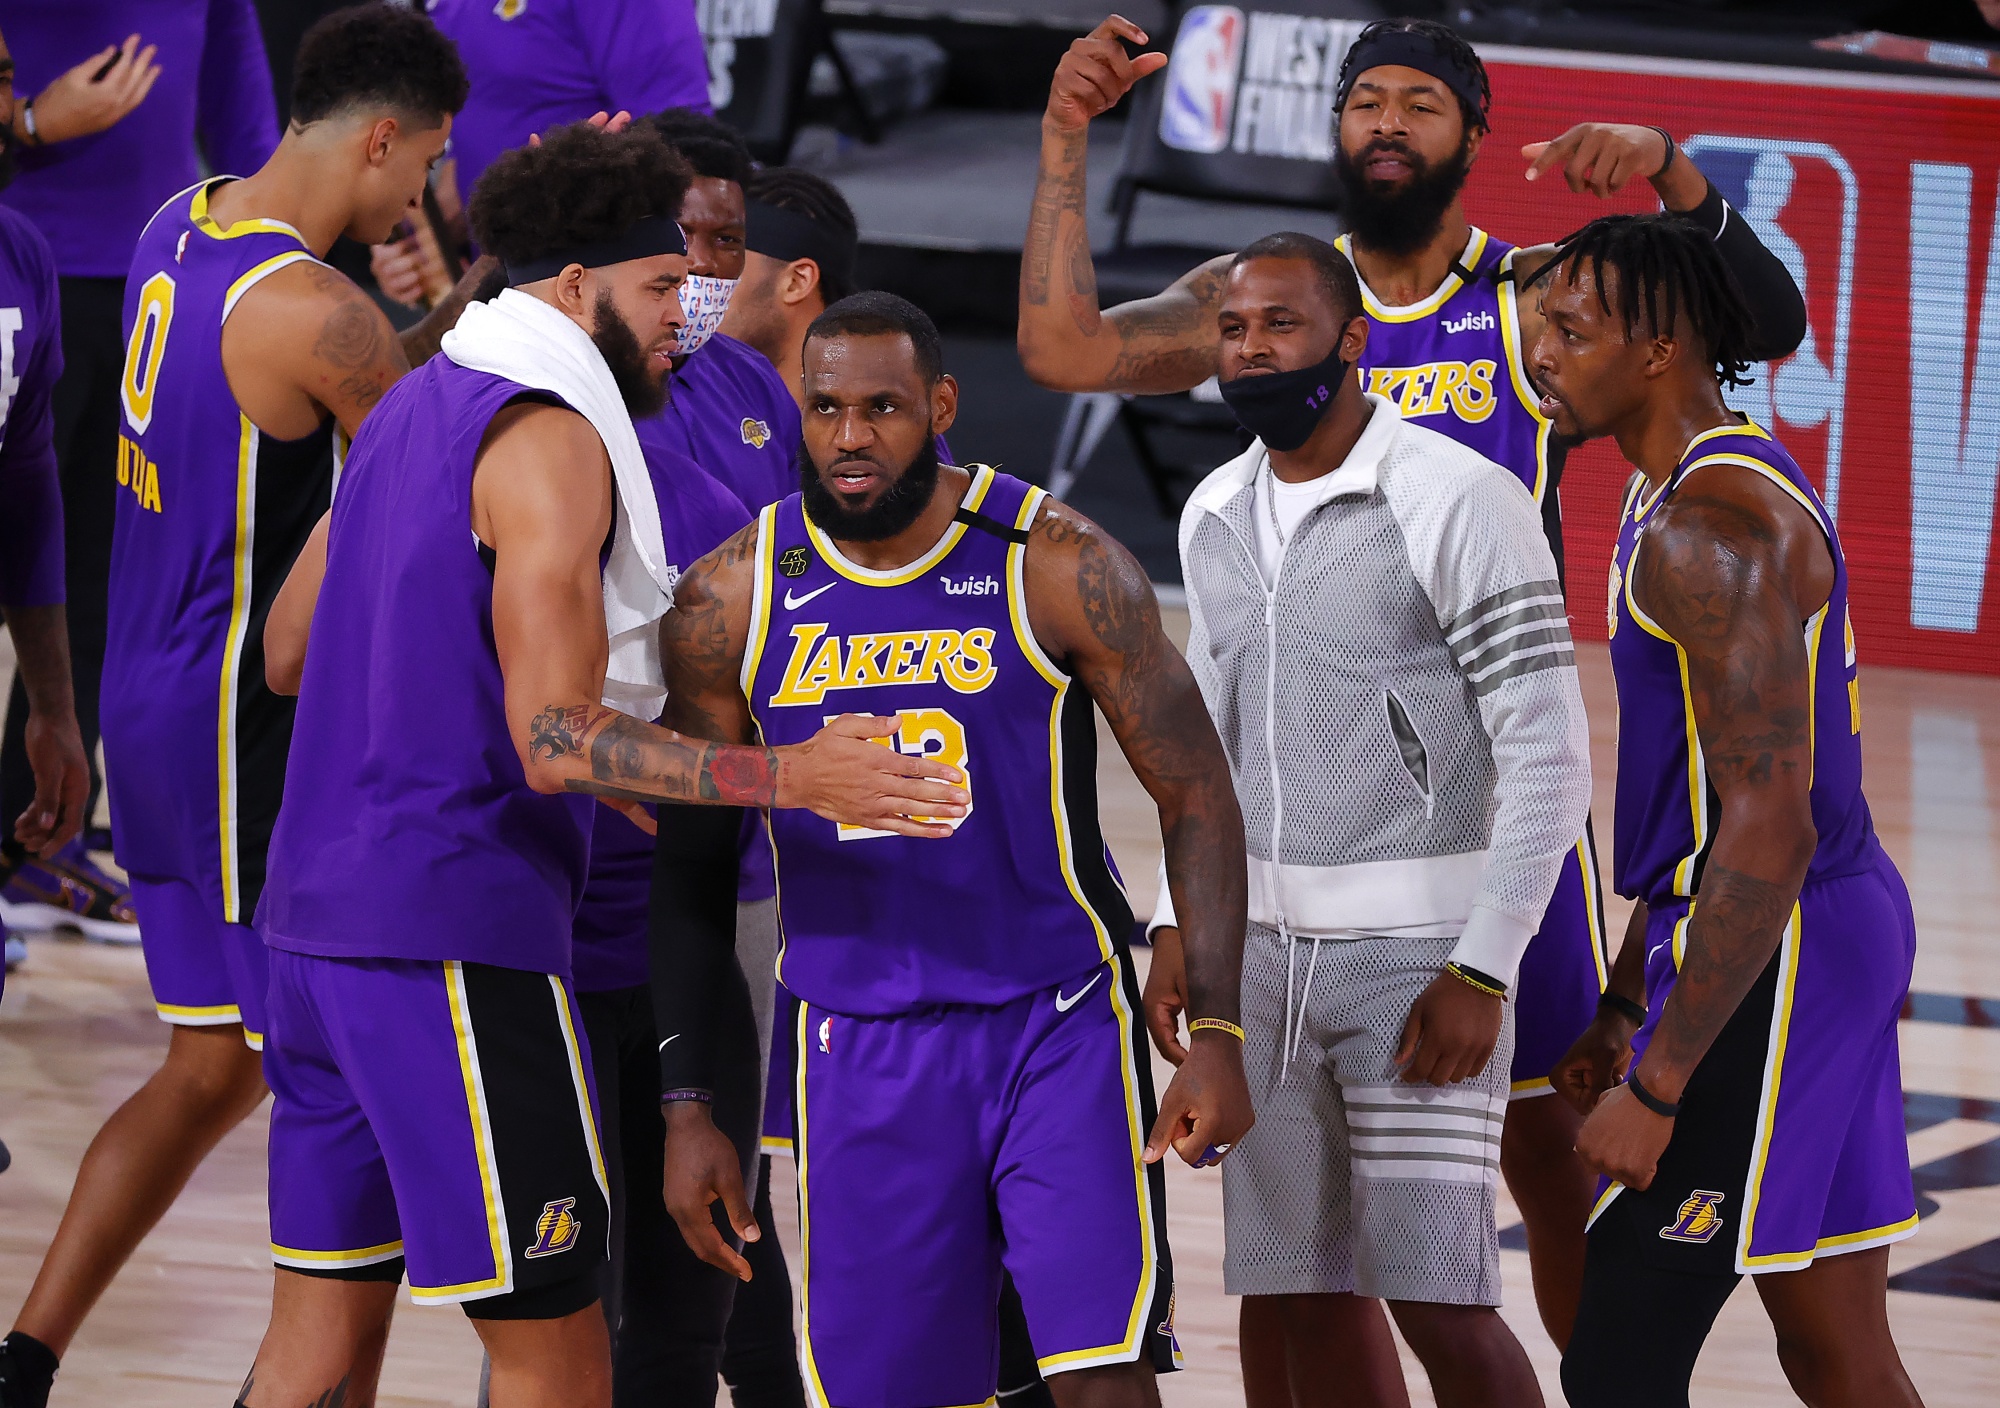 LeBron James's First Game in Los Angeles Turns Into Fight Night - WSJ